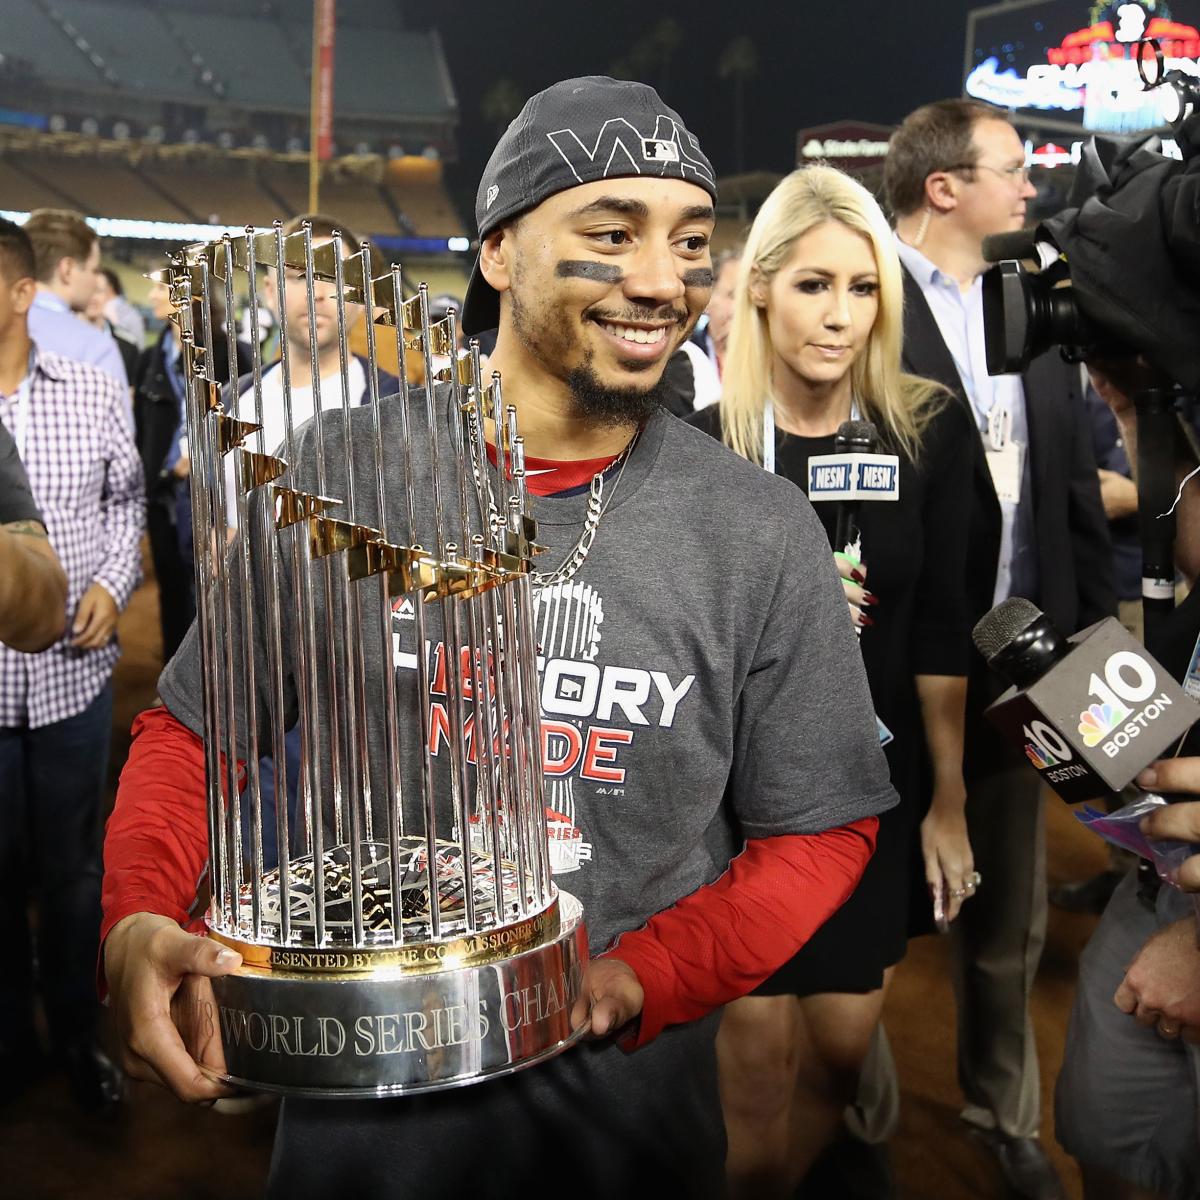 Red Sox World Series trophies come to town